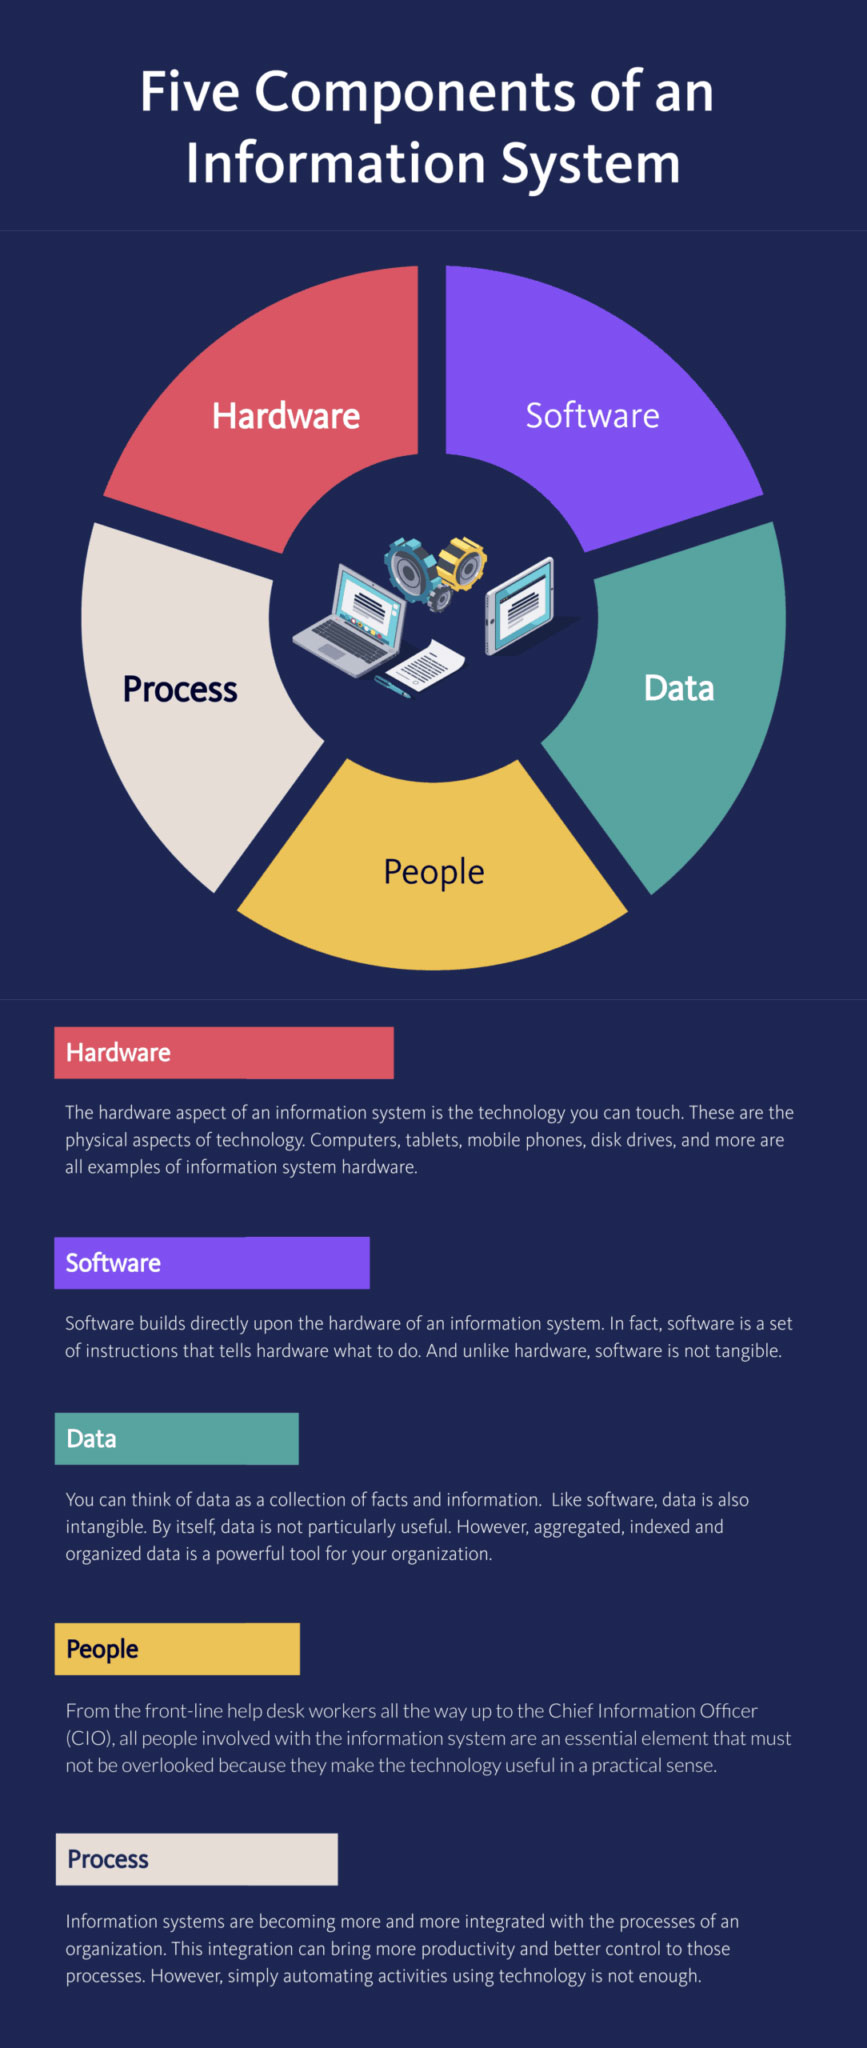 Graphic displaying the 5 components of an information system: hardware, software, data, people, and process.